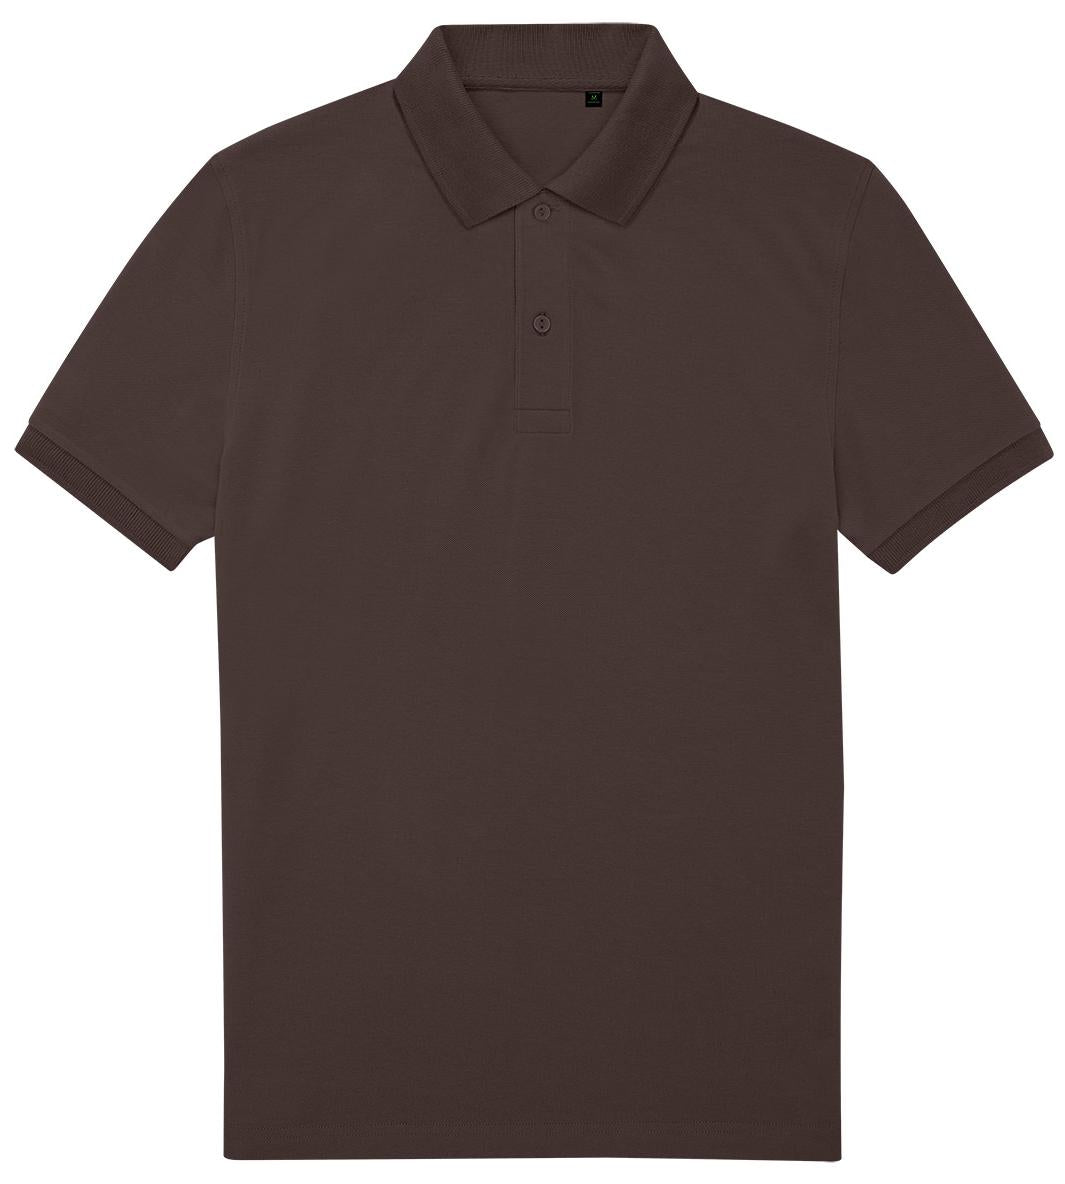 B&C Collection My Eco Polo 65/35 - Roasted Coffee